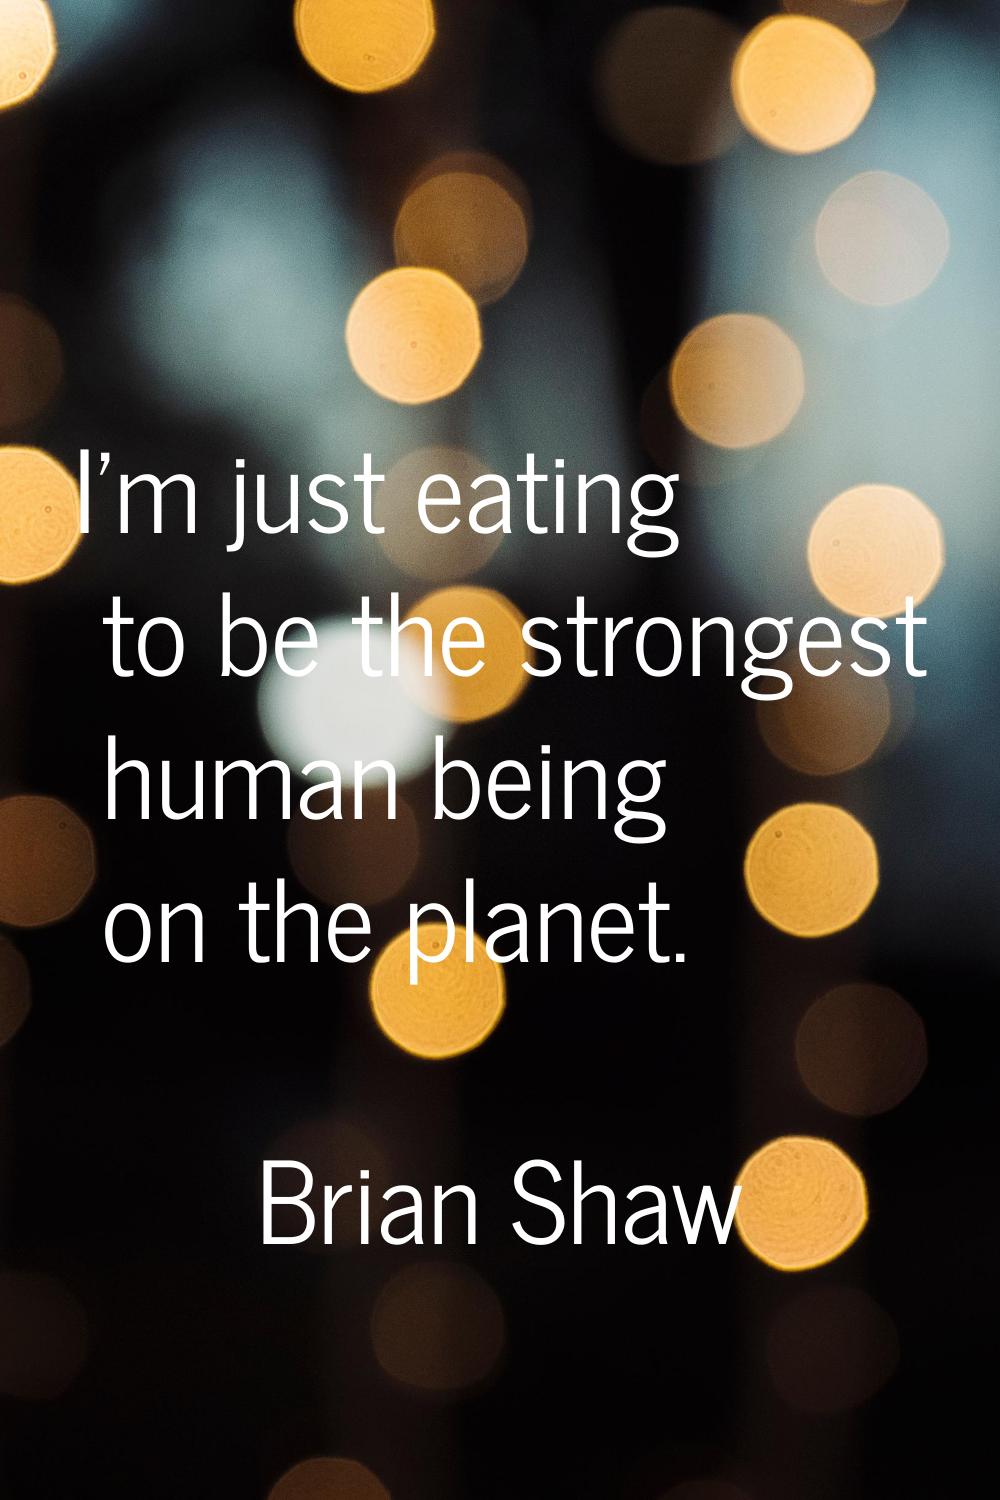 I'm just eating to be the strongest human being on the planet.